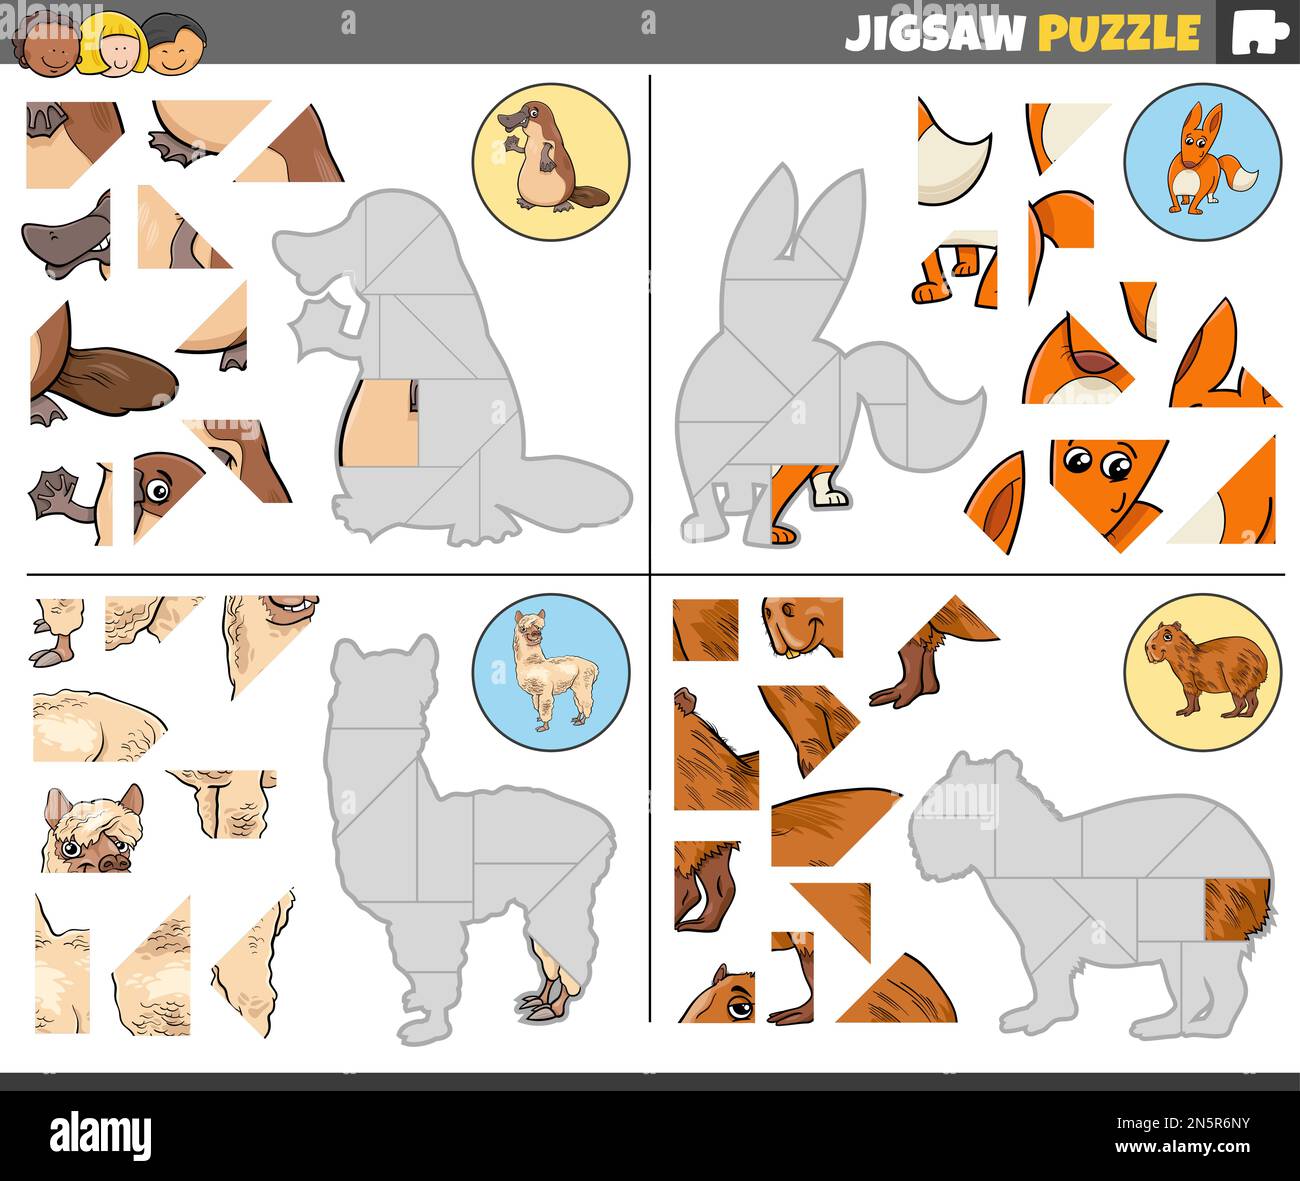 Cartoon illustration of educational jigsaw puzzle games set with animal characters Stock Vector